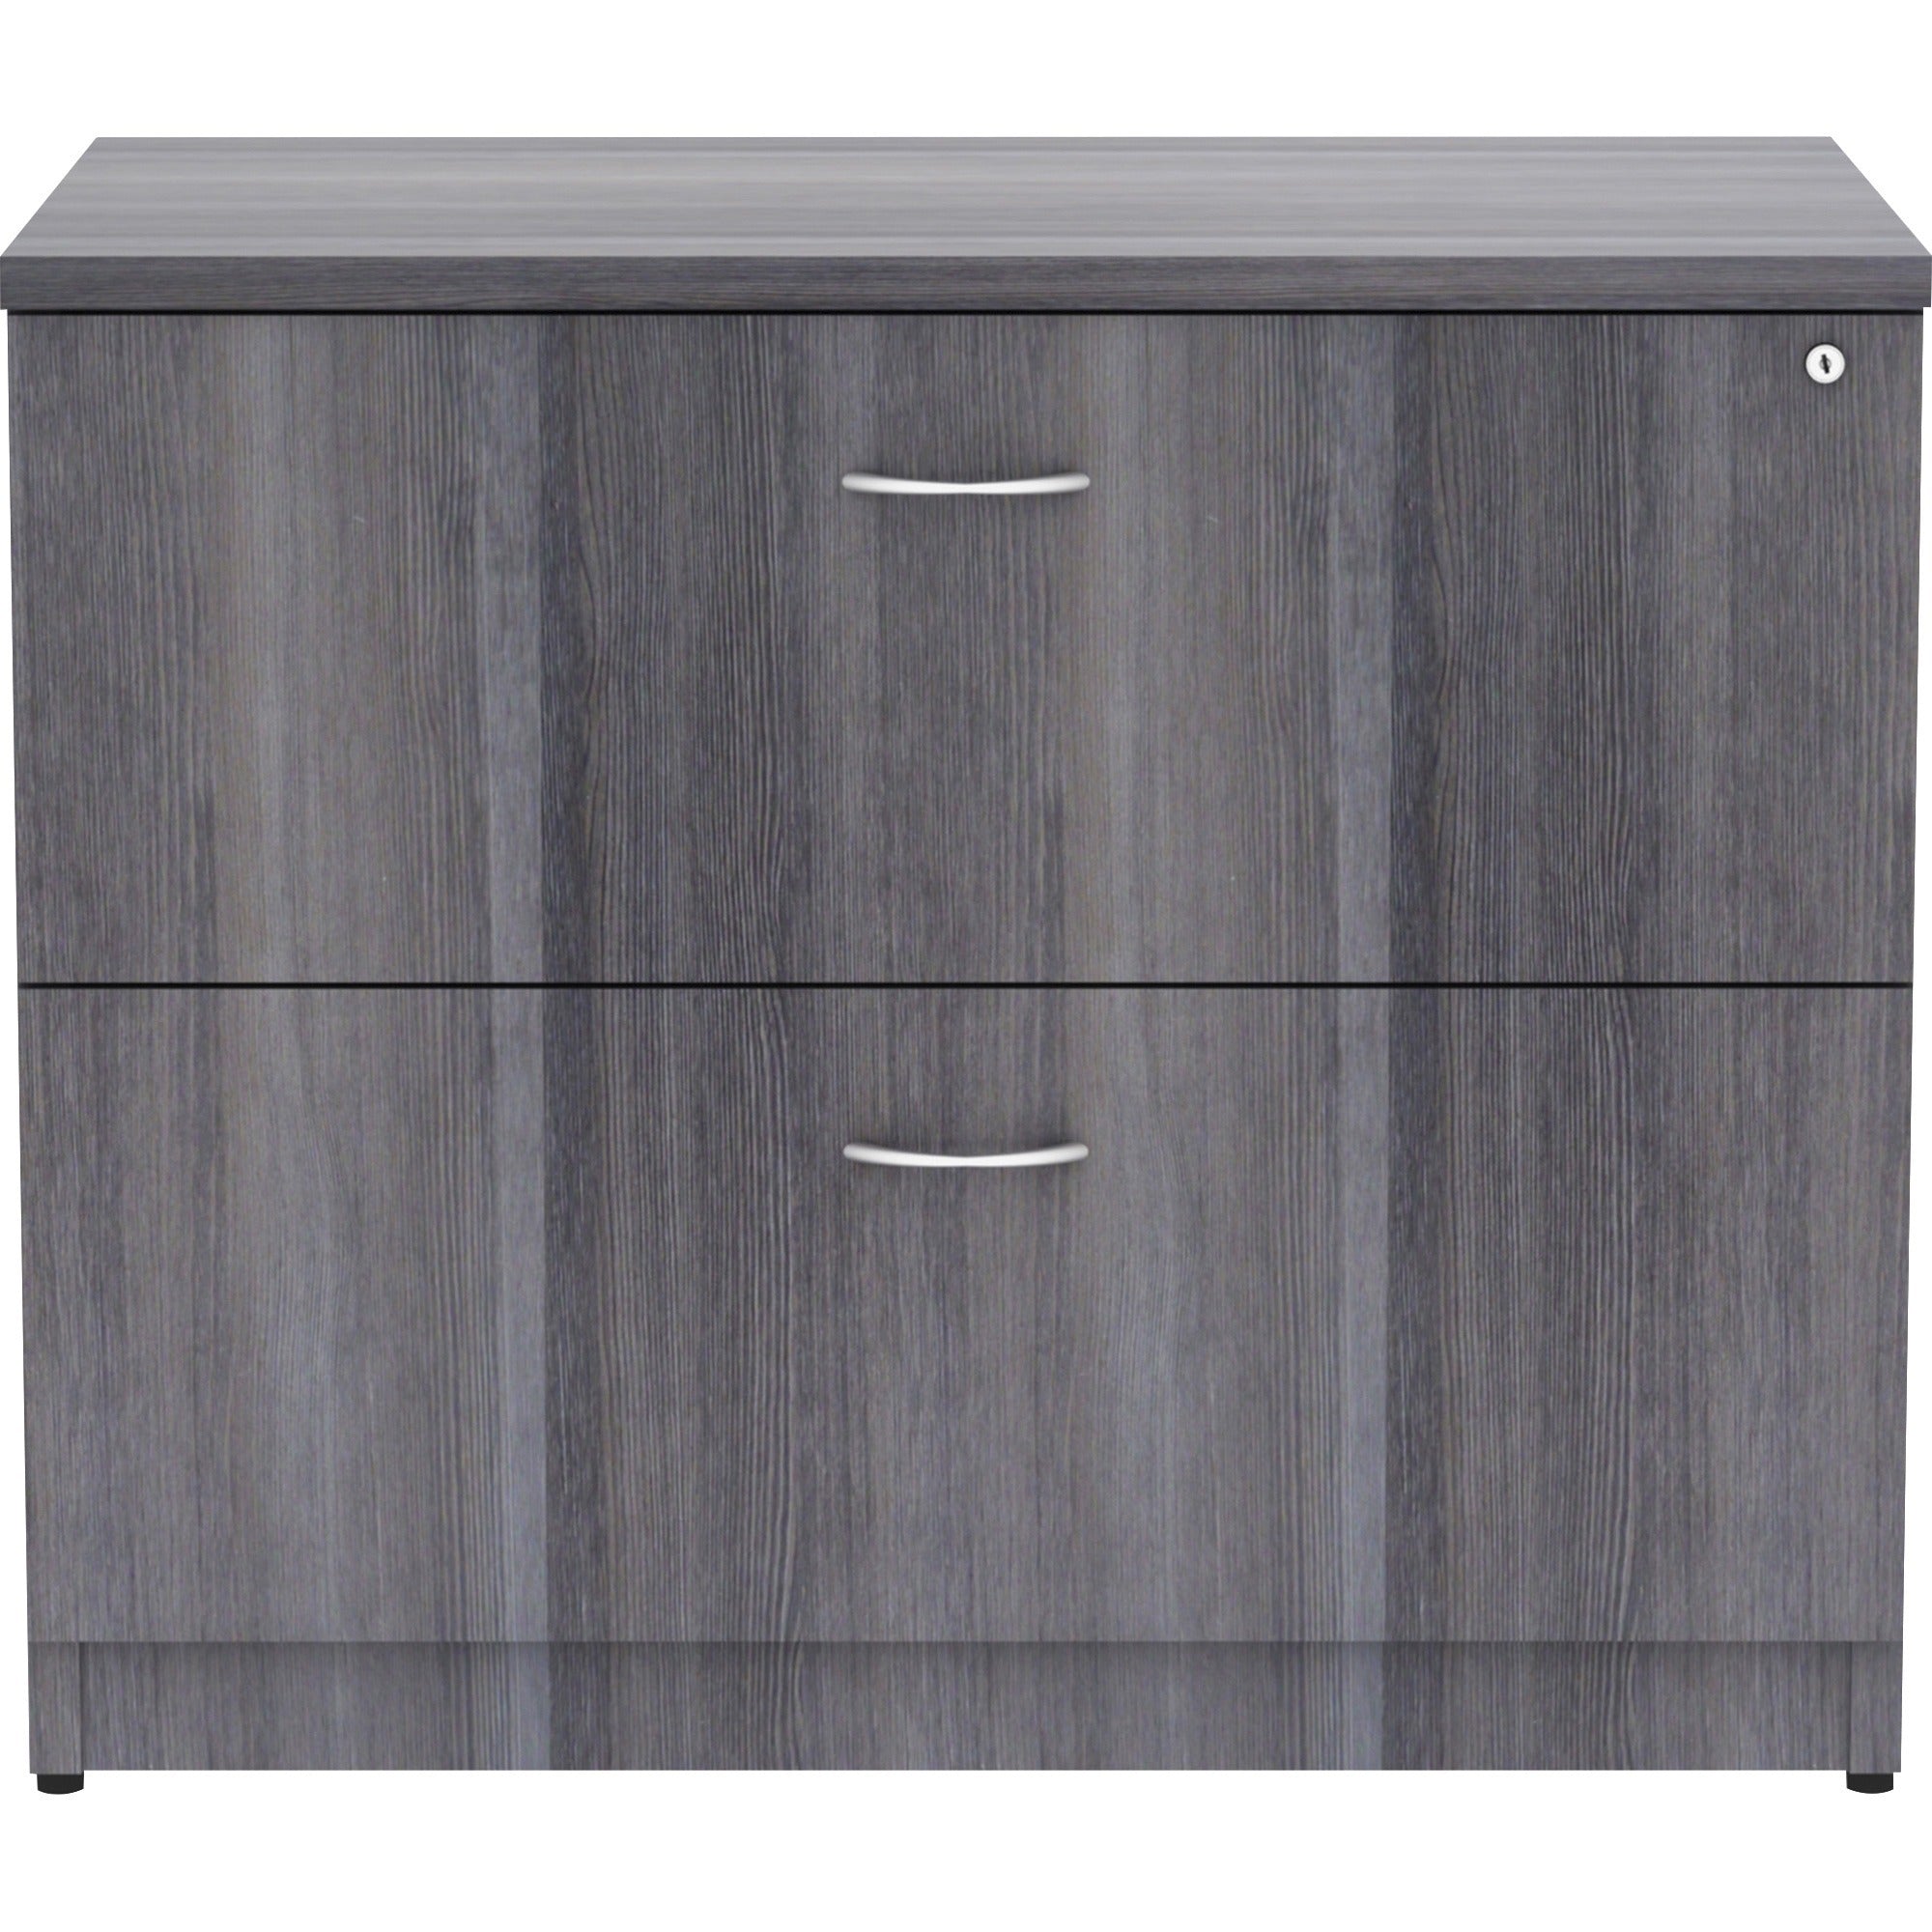 lorell-essentials-series-lateral-file-35-x-22295--1-top-2-x-file-drawers-finish-weathered-charcoal-laminate_llr69563 - 2